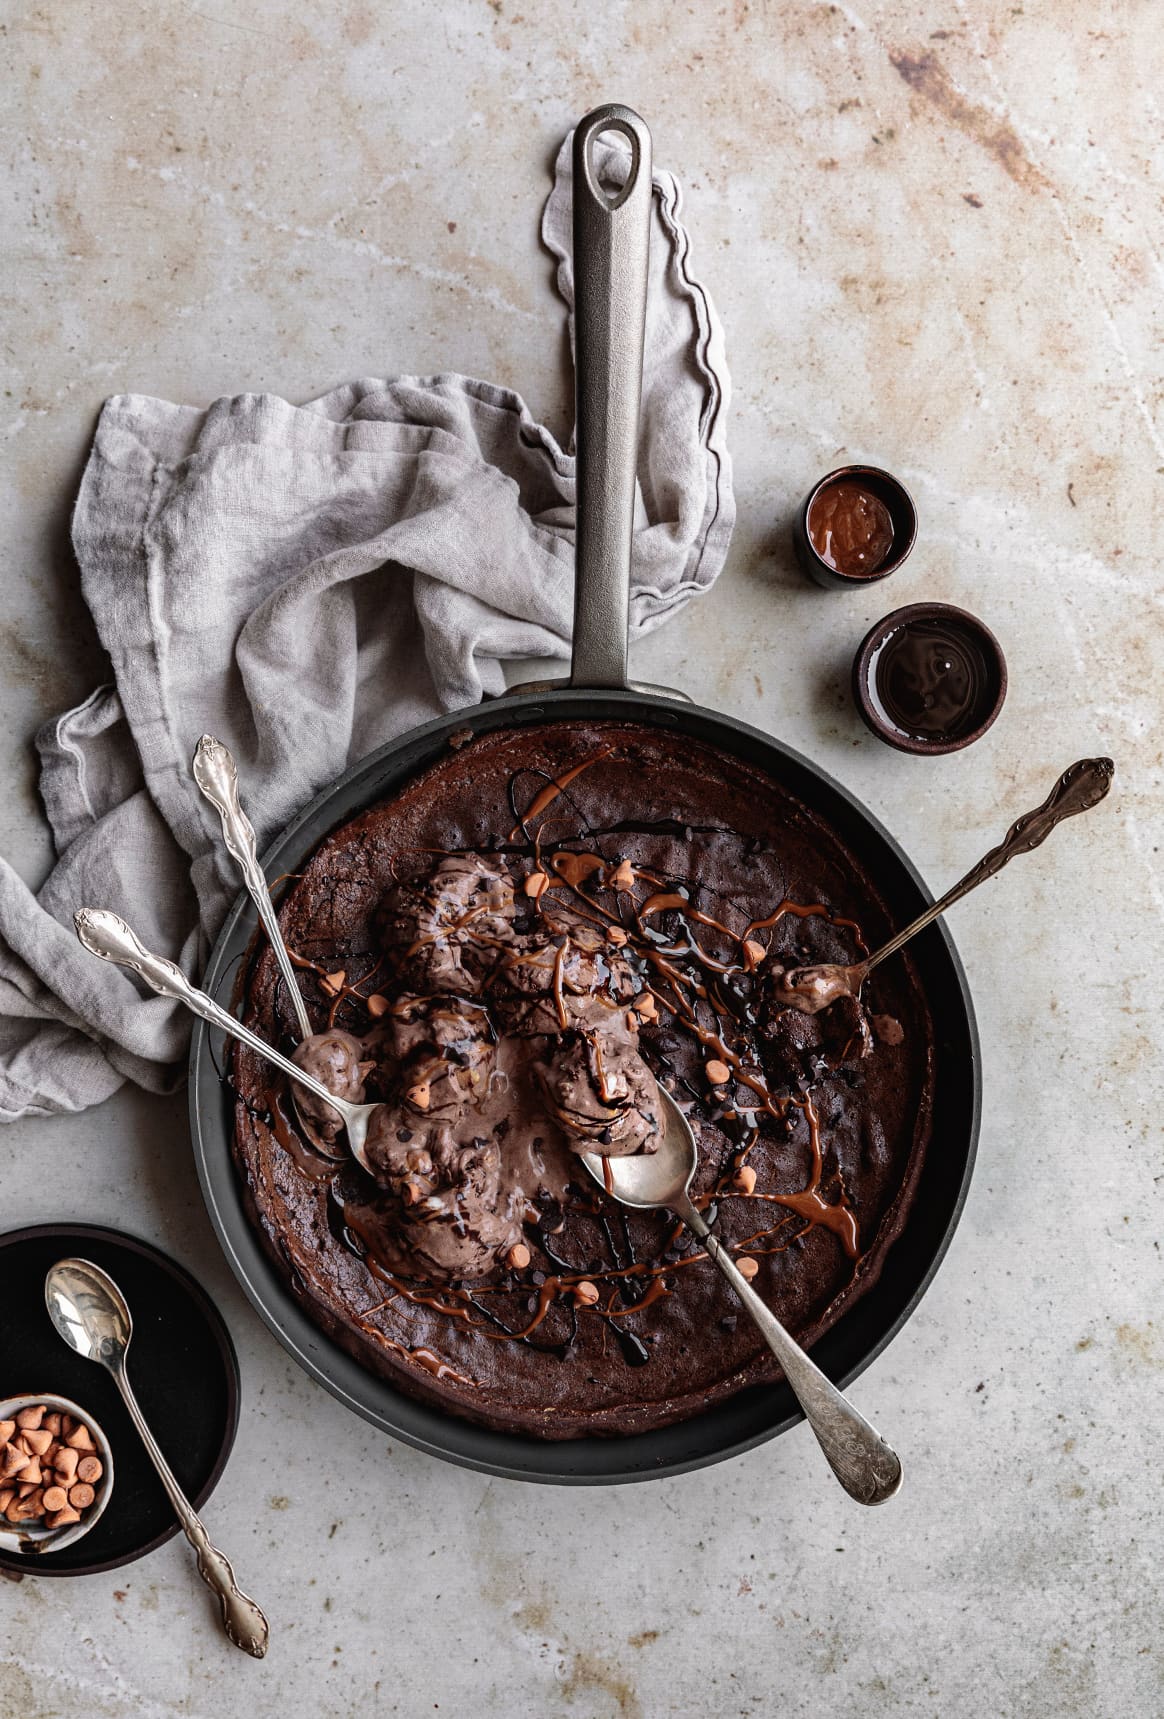 This warm Triple Chocolate Dutch Baby with a puffy center and crispy edges, served with chocolate ice cream, makes  the perfect shareable dessert any time of the year!